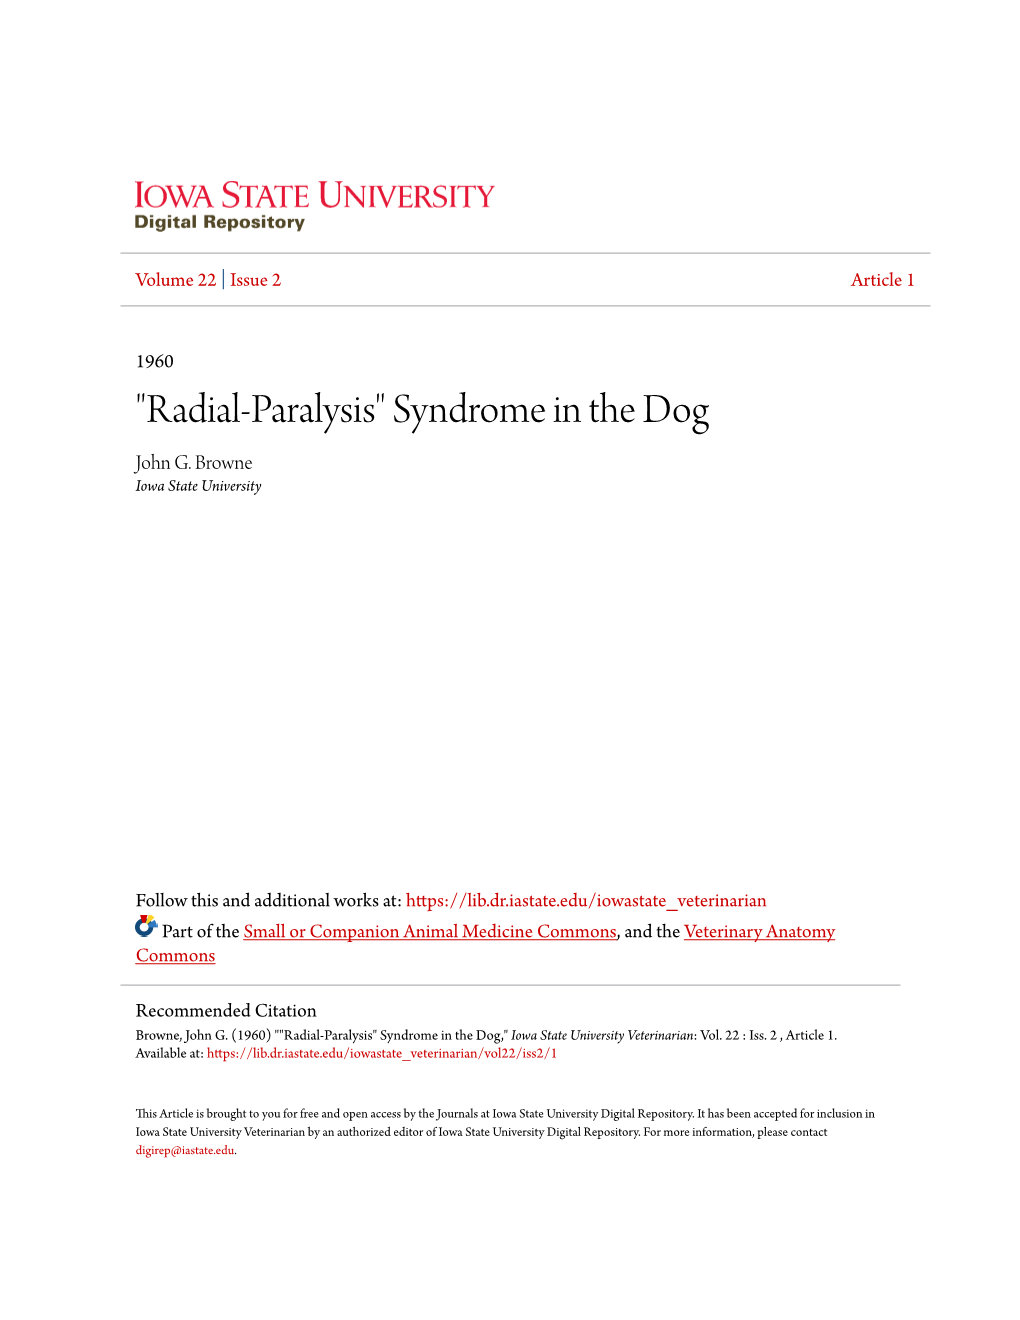 "Radial-Paralysis" Syndrome in the Dog John G